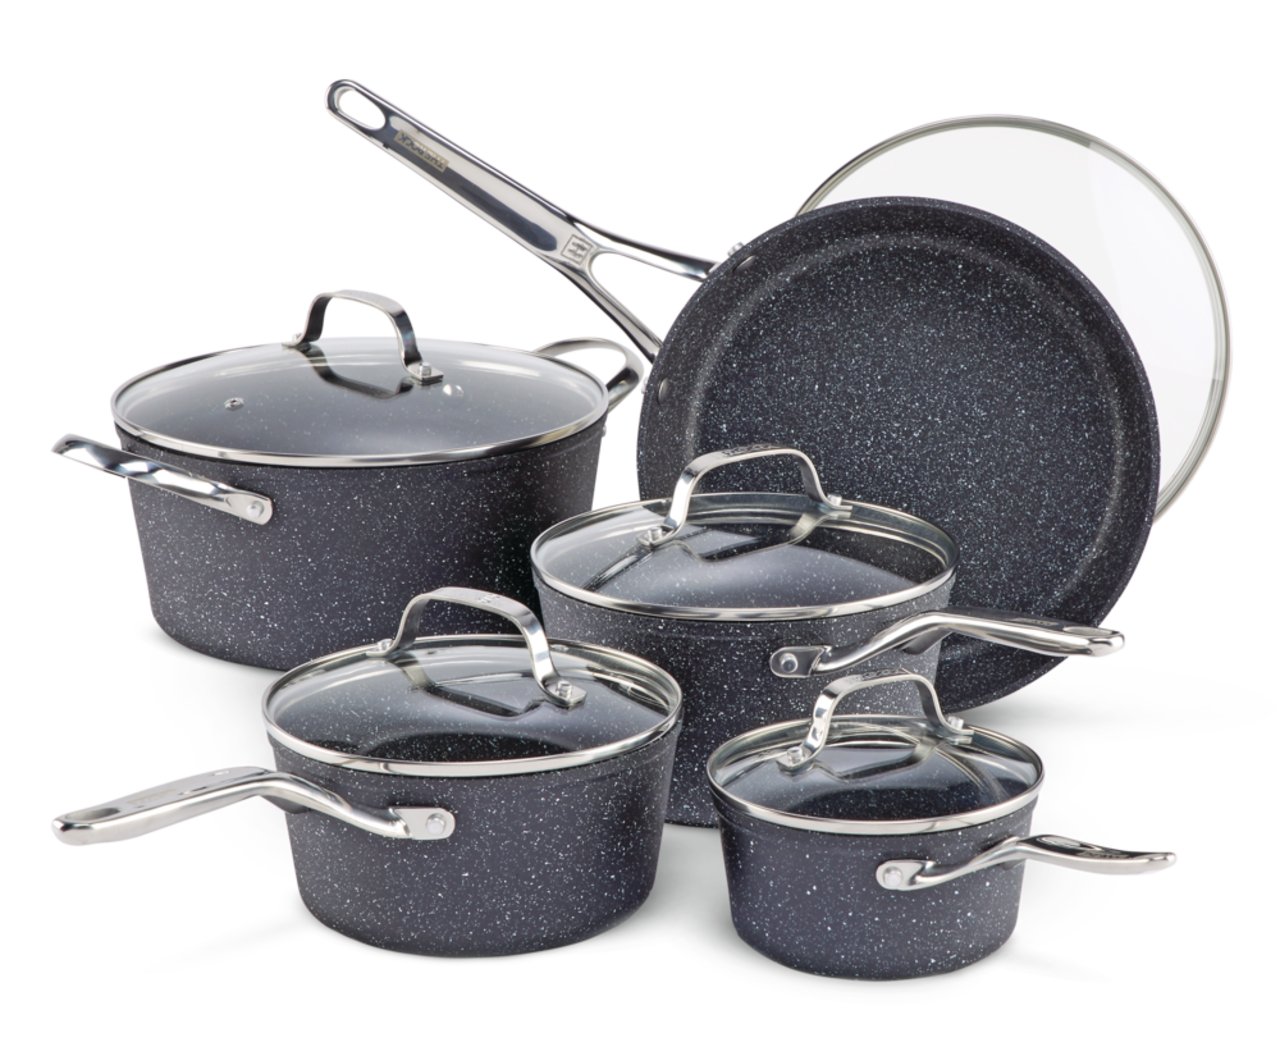 https://media-www.canadiantire.ca/product/living/kitchen/cookware/1427071/heritage-rock-10pc-forged-non-stick-0ebbea60-846c-4da6-92dc-7e48329322ee.png?imdensity=1&imwidth=1244&impolicy=mZoom